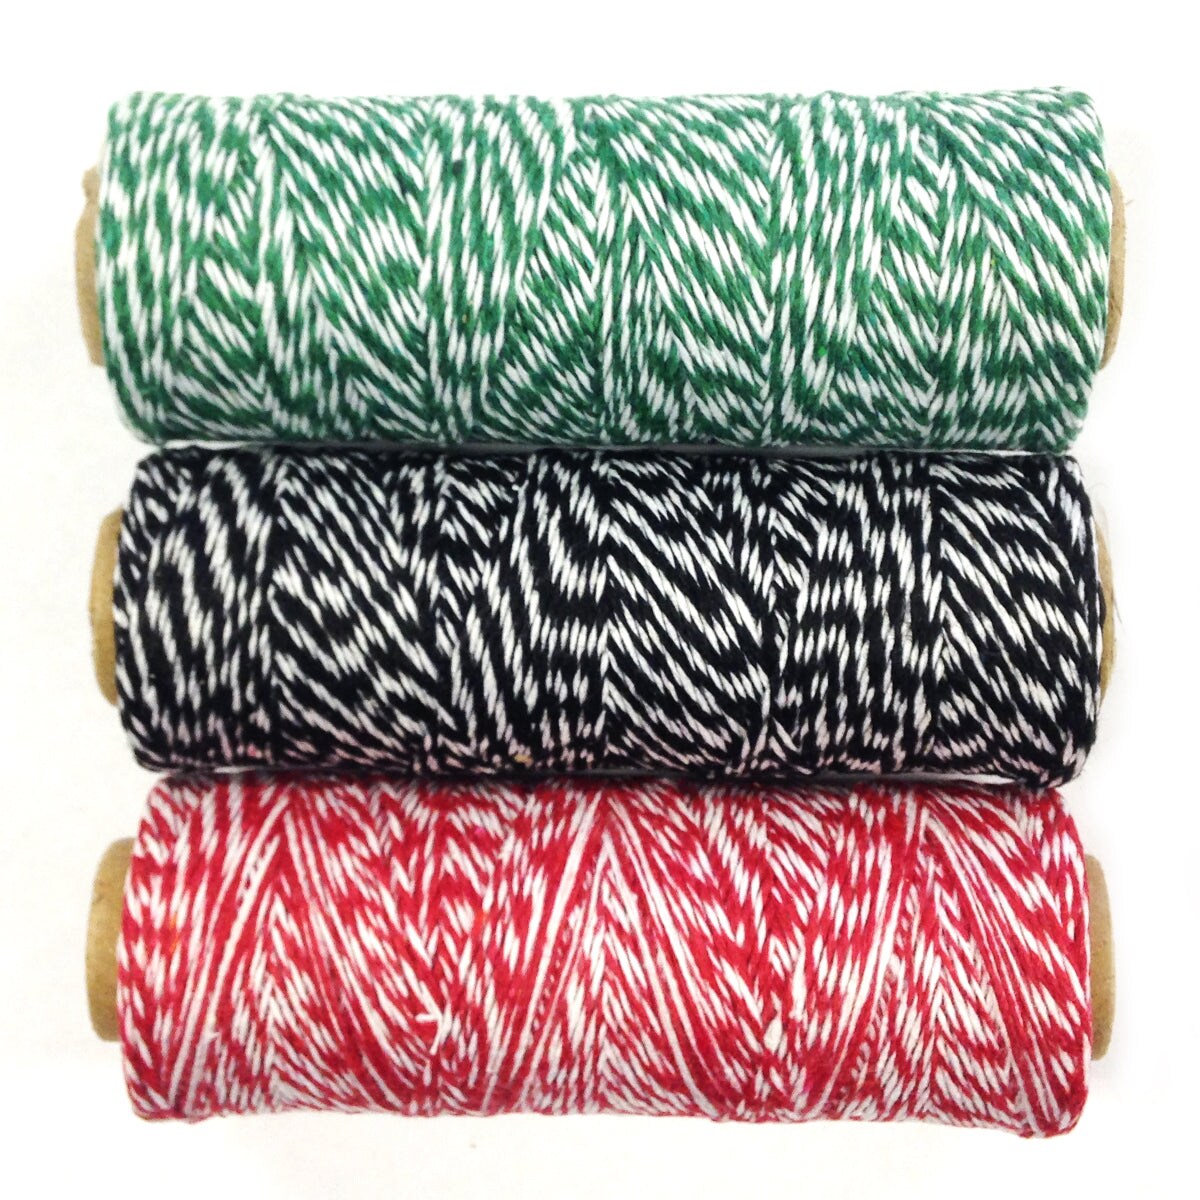 Wrapables Cotton Baker&#x27;s Twine 4ply 330 Yards (Set of 3 Spools x 110 Yards) for Gift Wrapping, Party Decor, and Arts and Craft (Dark Green, Black, Red)